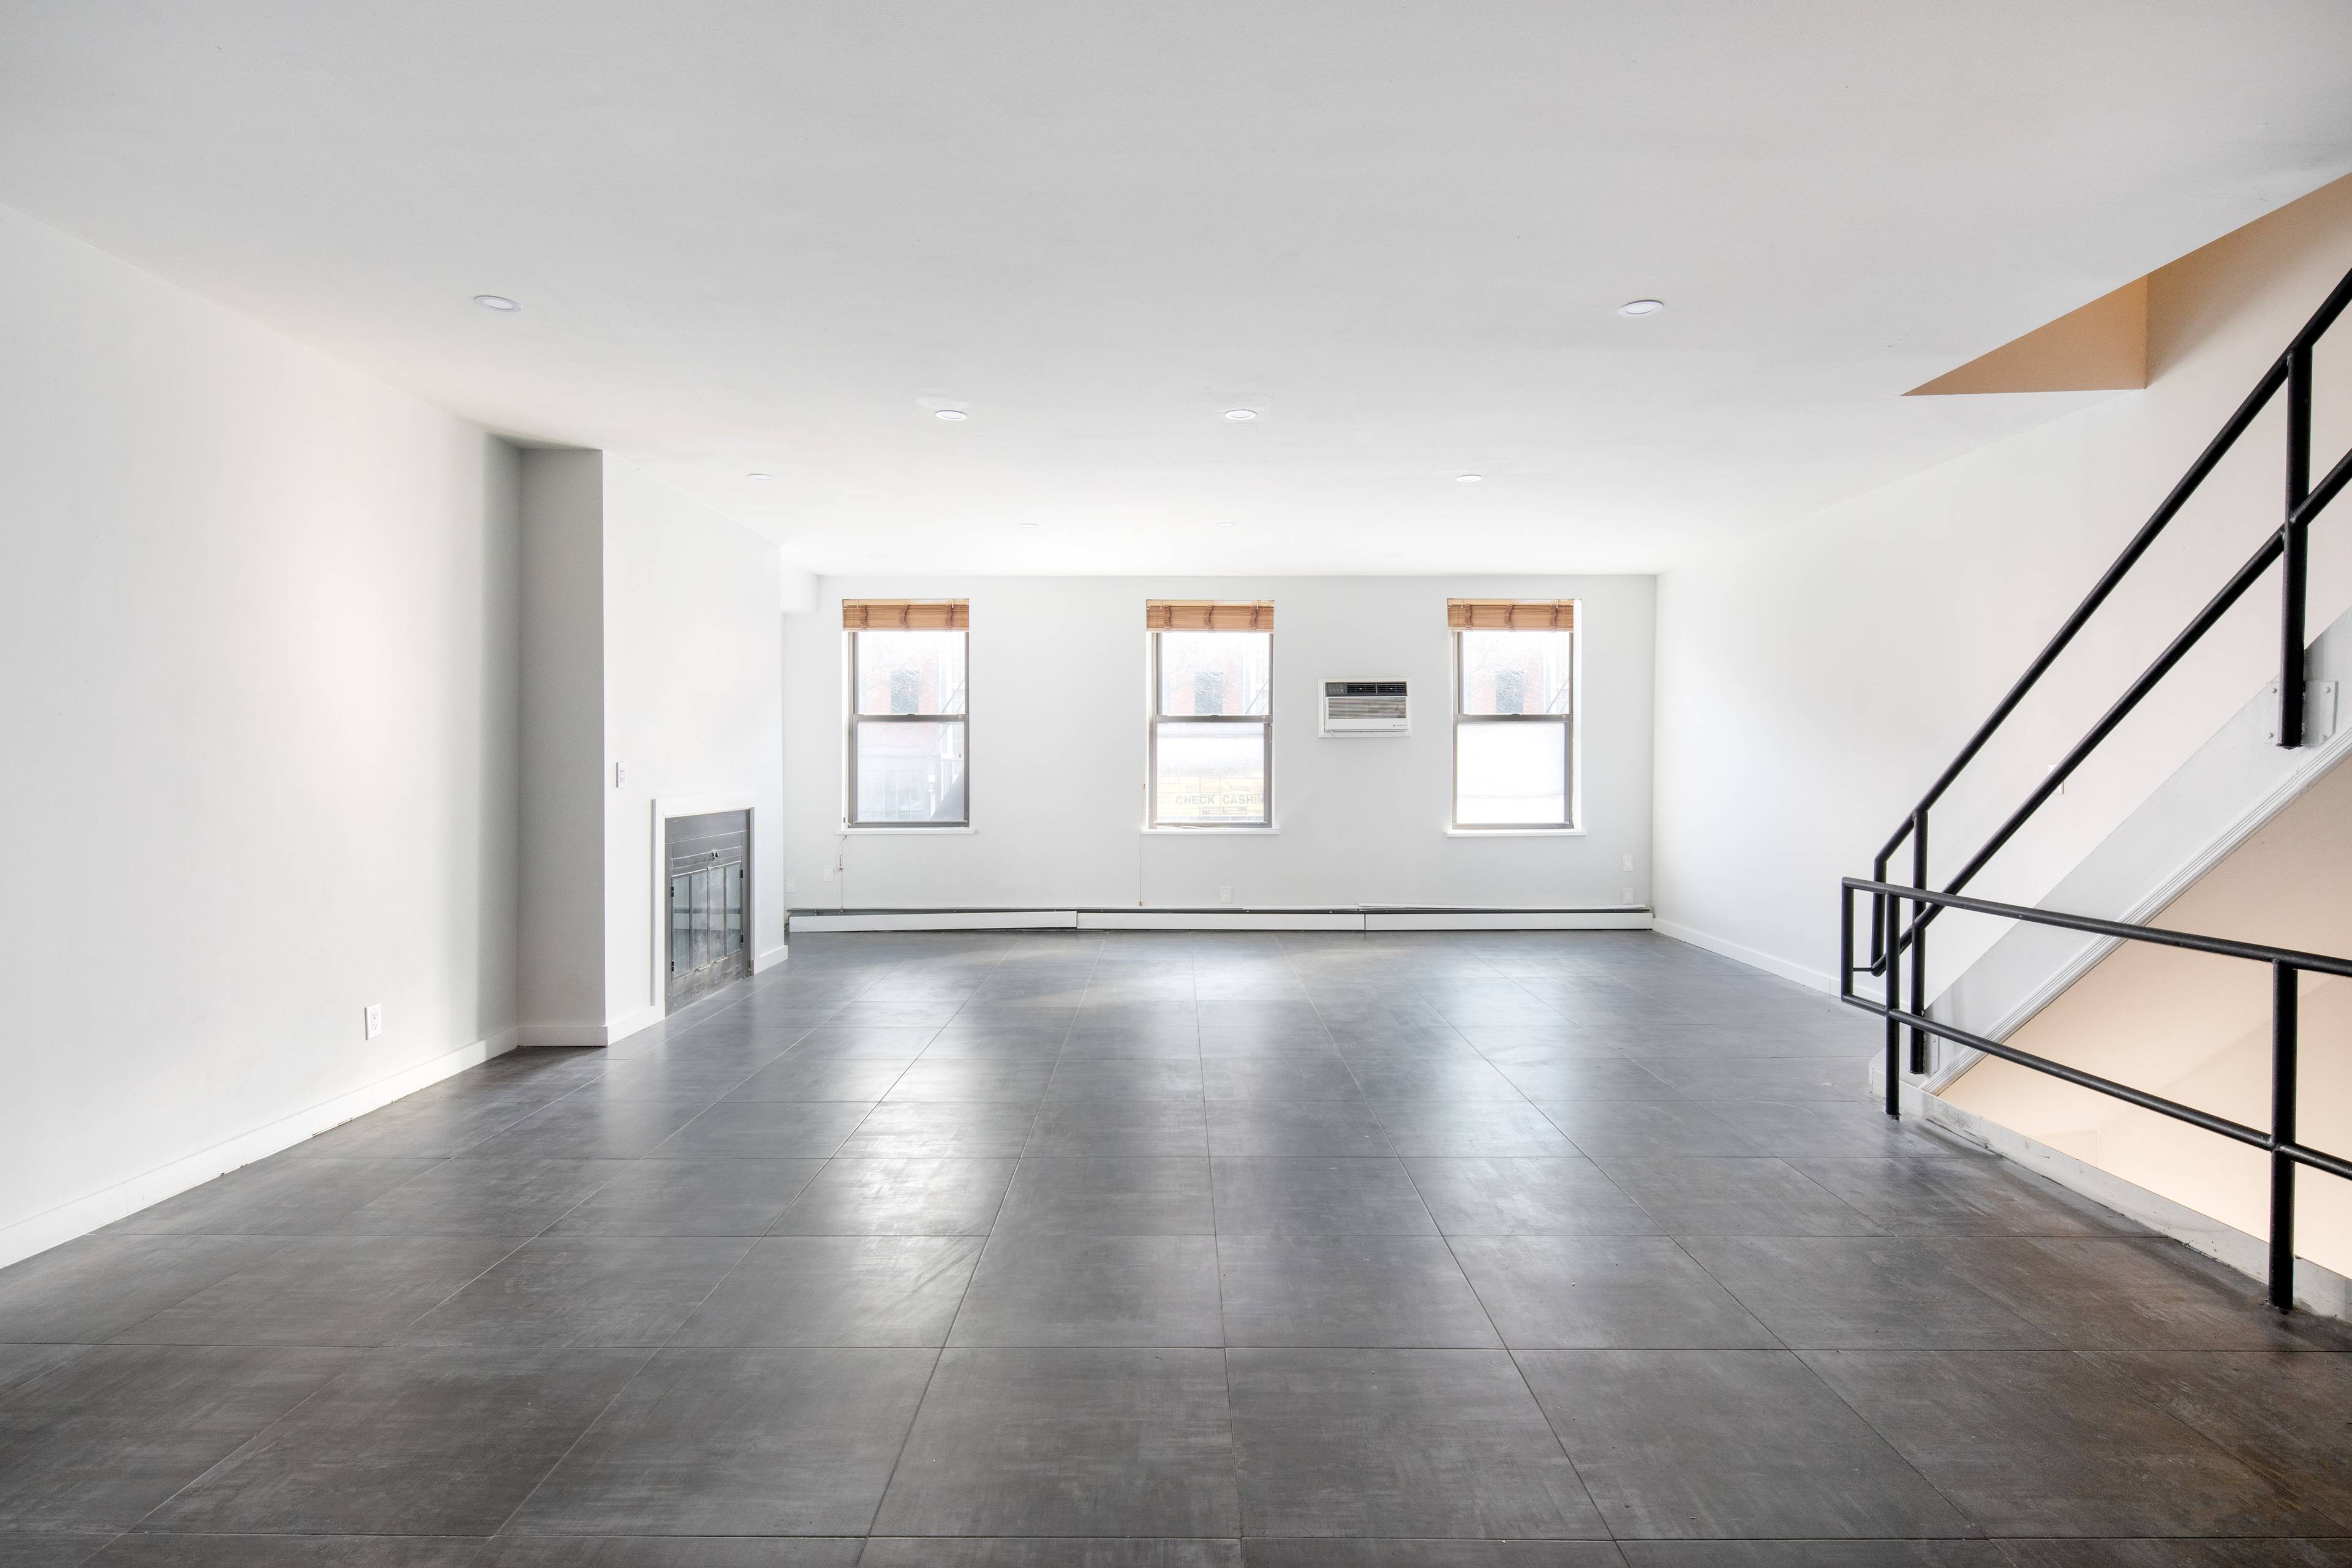 As exclusive agent, we are pleased to offer for sale a townhouse gem with an income producing component located at 169 First Avenue in downtown Manhattan s East Village.